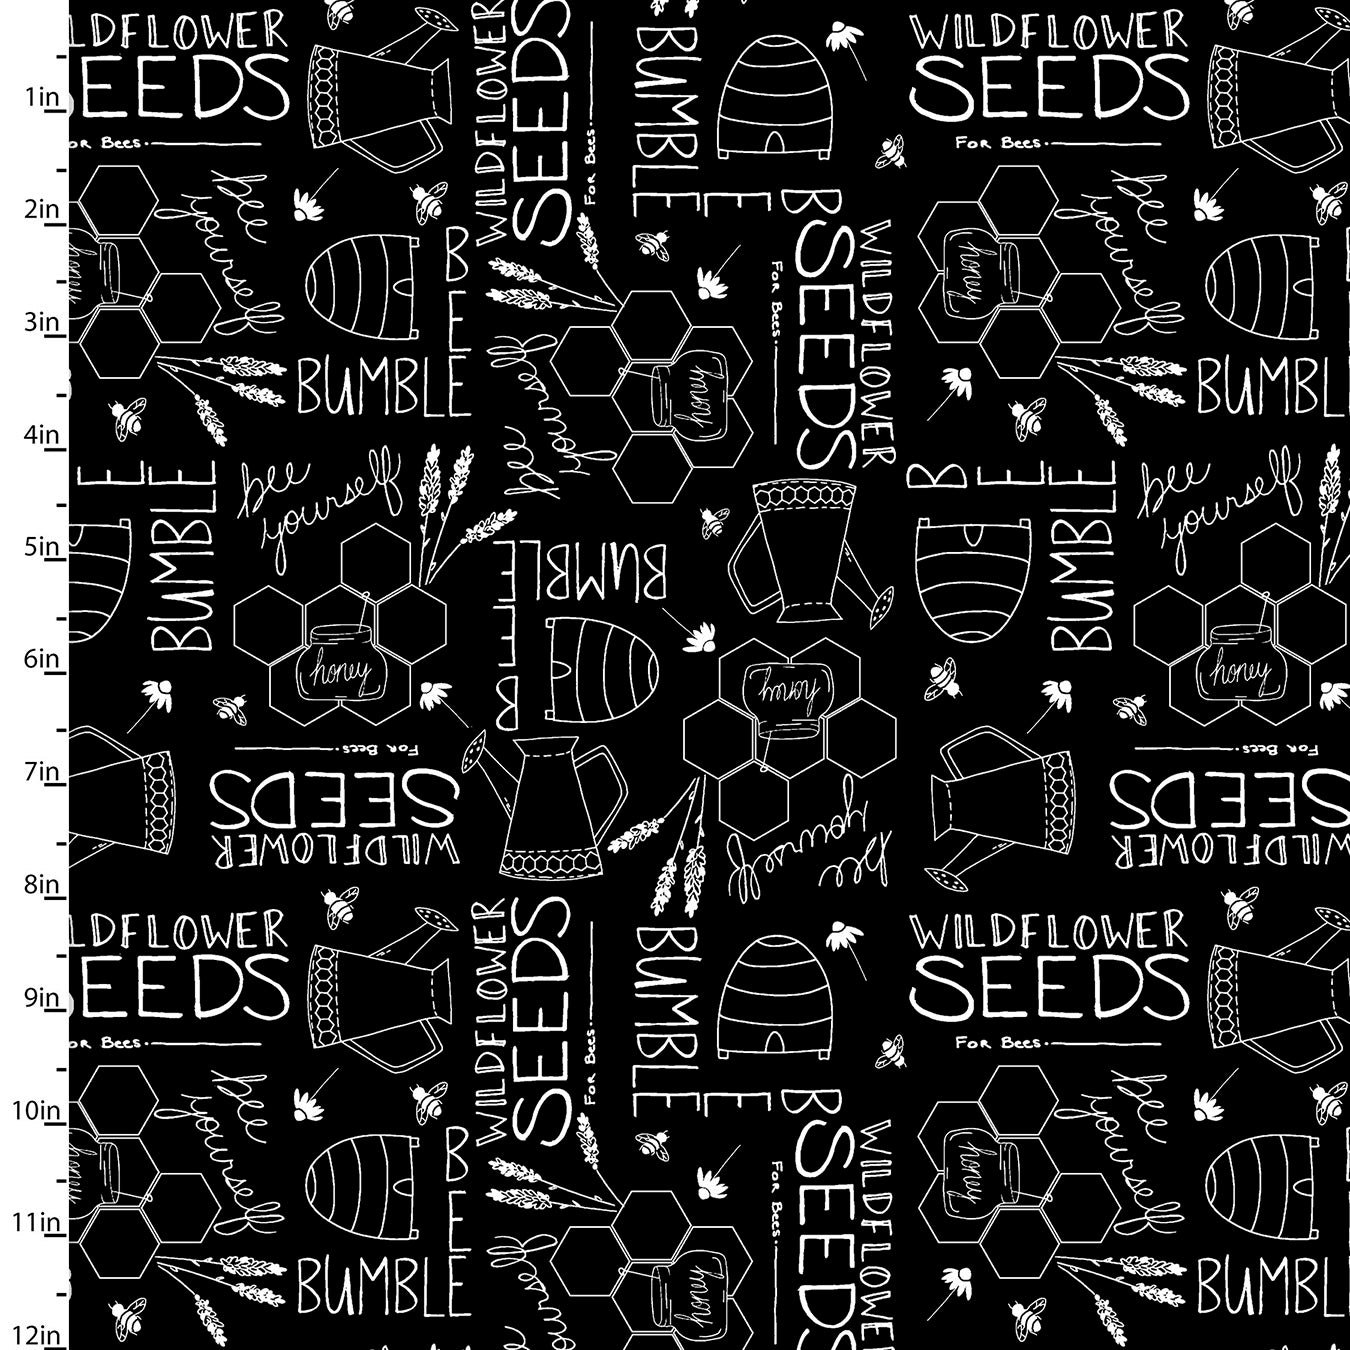 Feed the Bees Cotton Print - Bumble Seeds